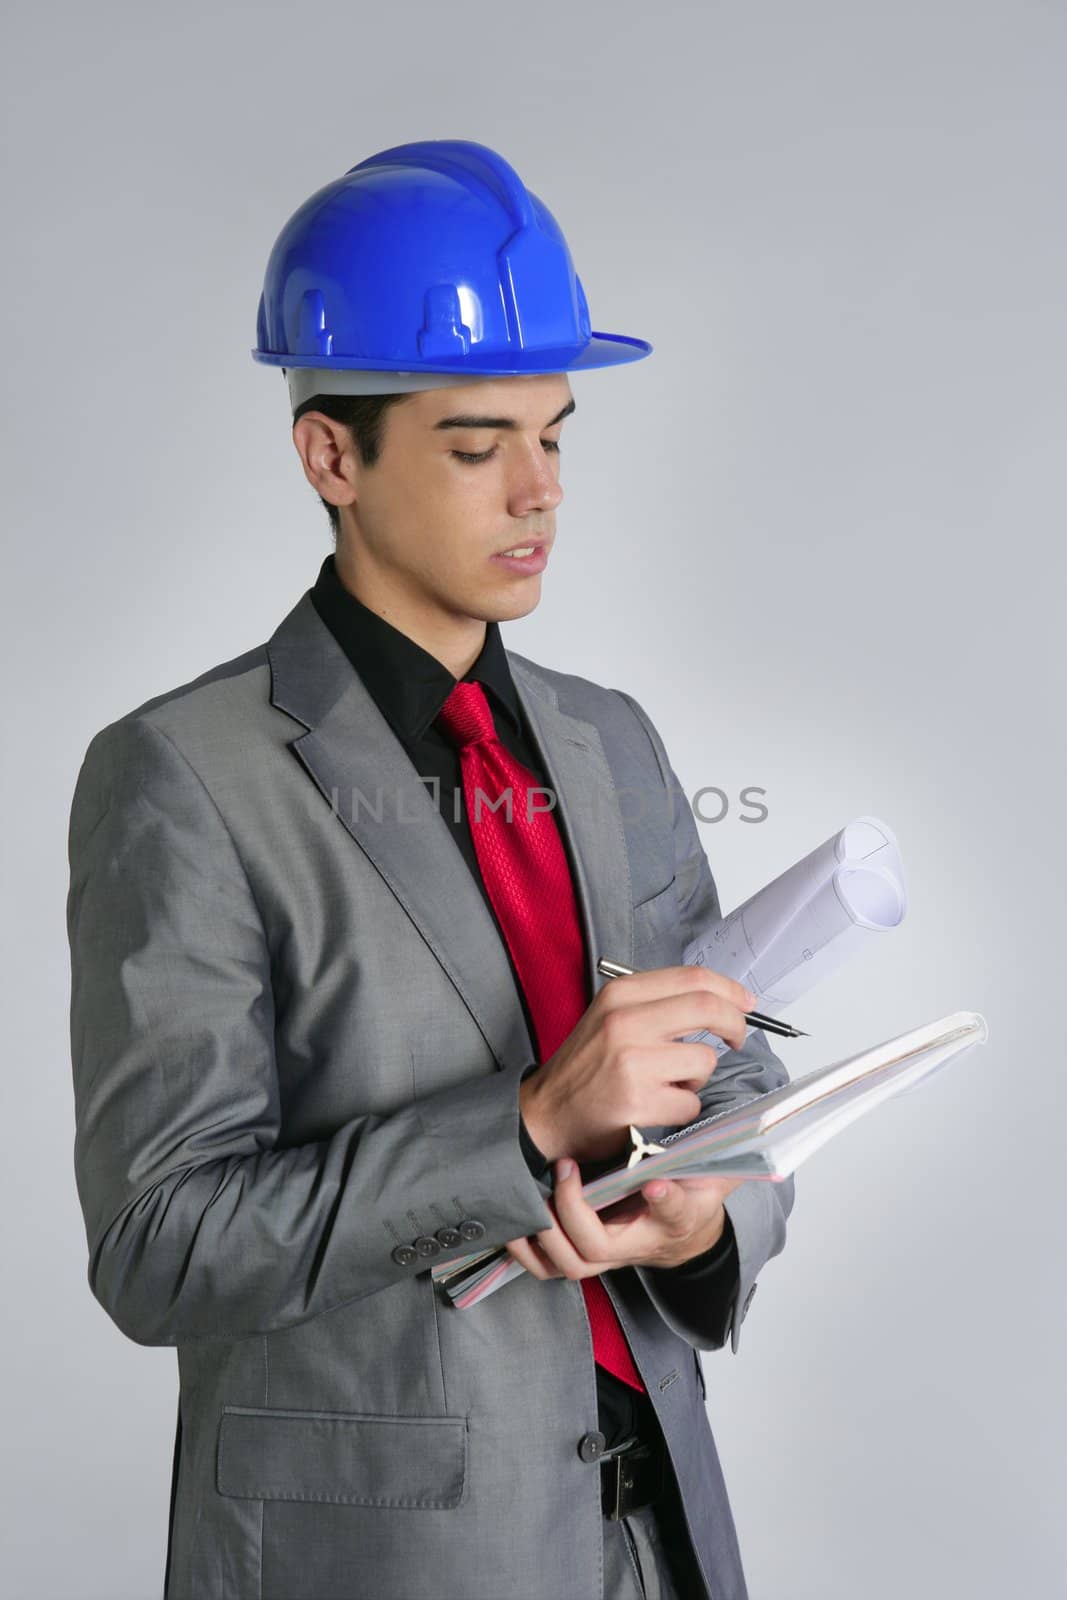 Architect engineer with blue hardhat and suit isolated on gray